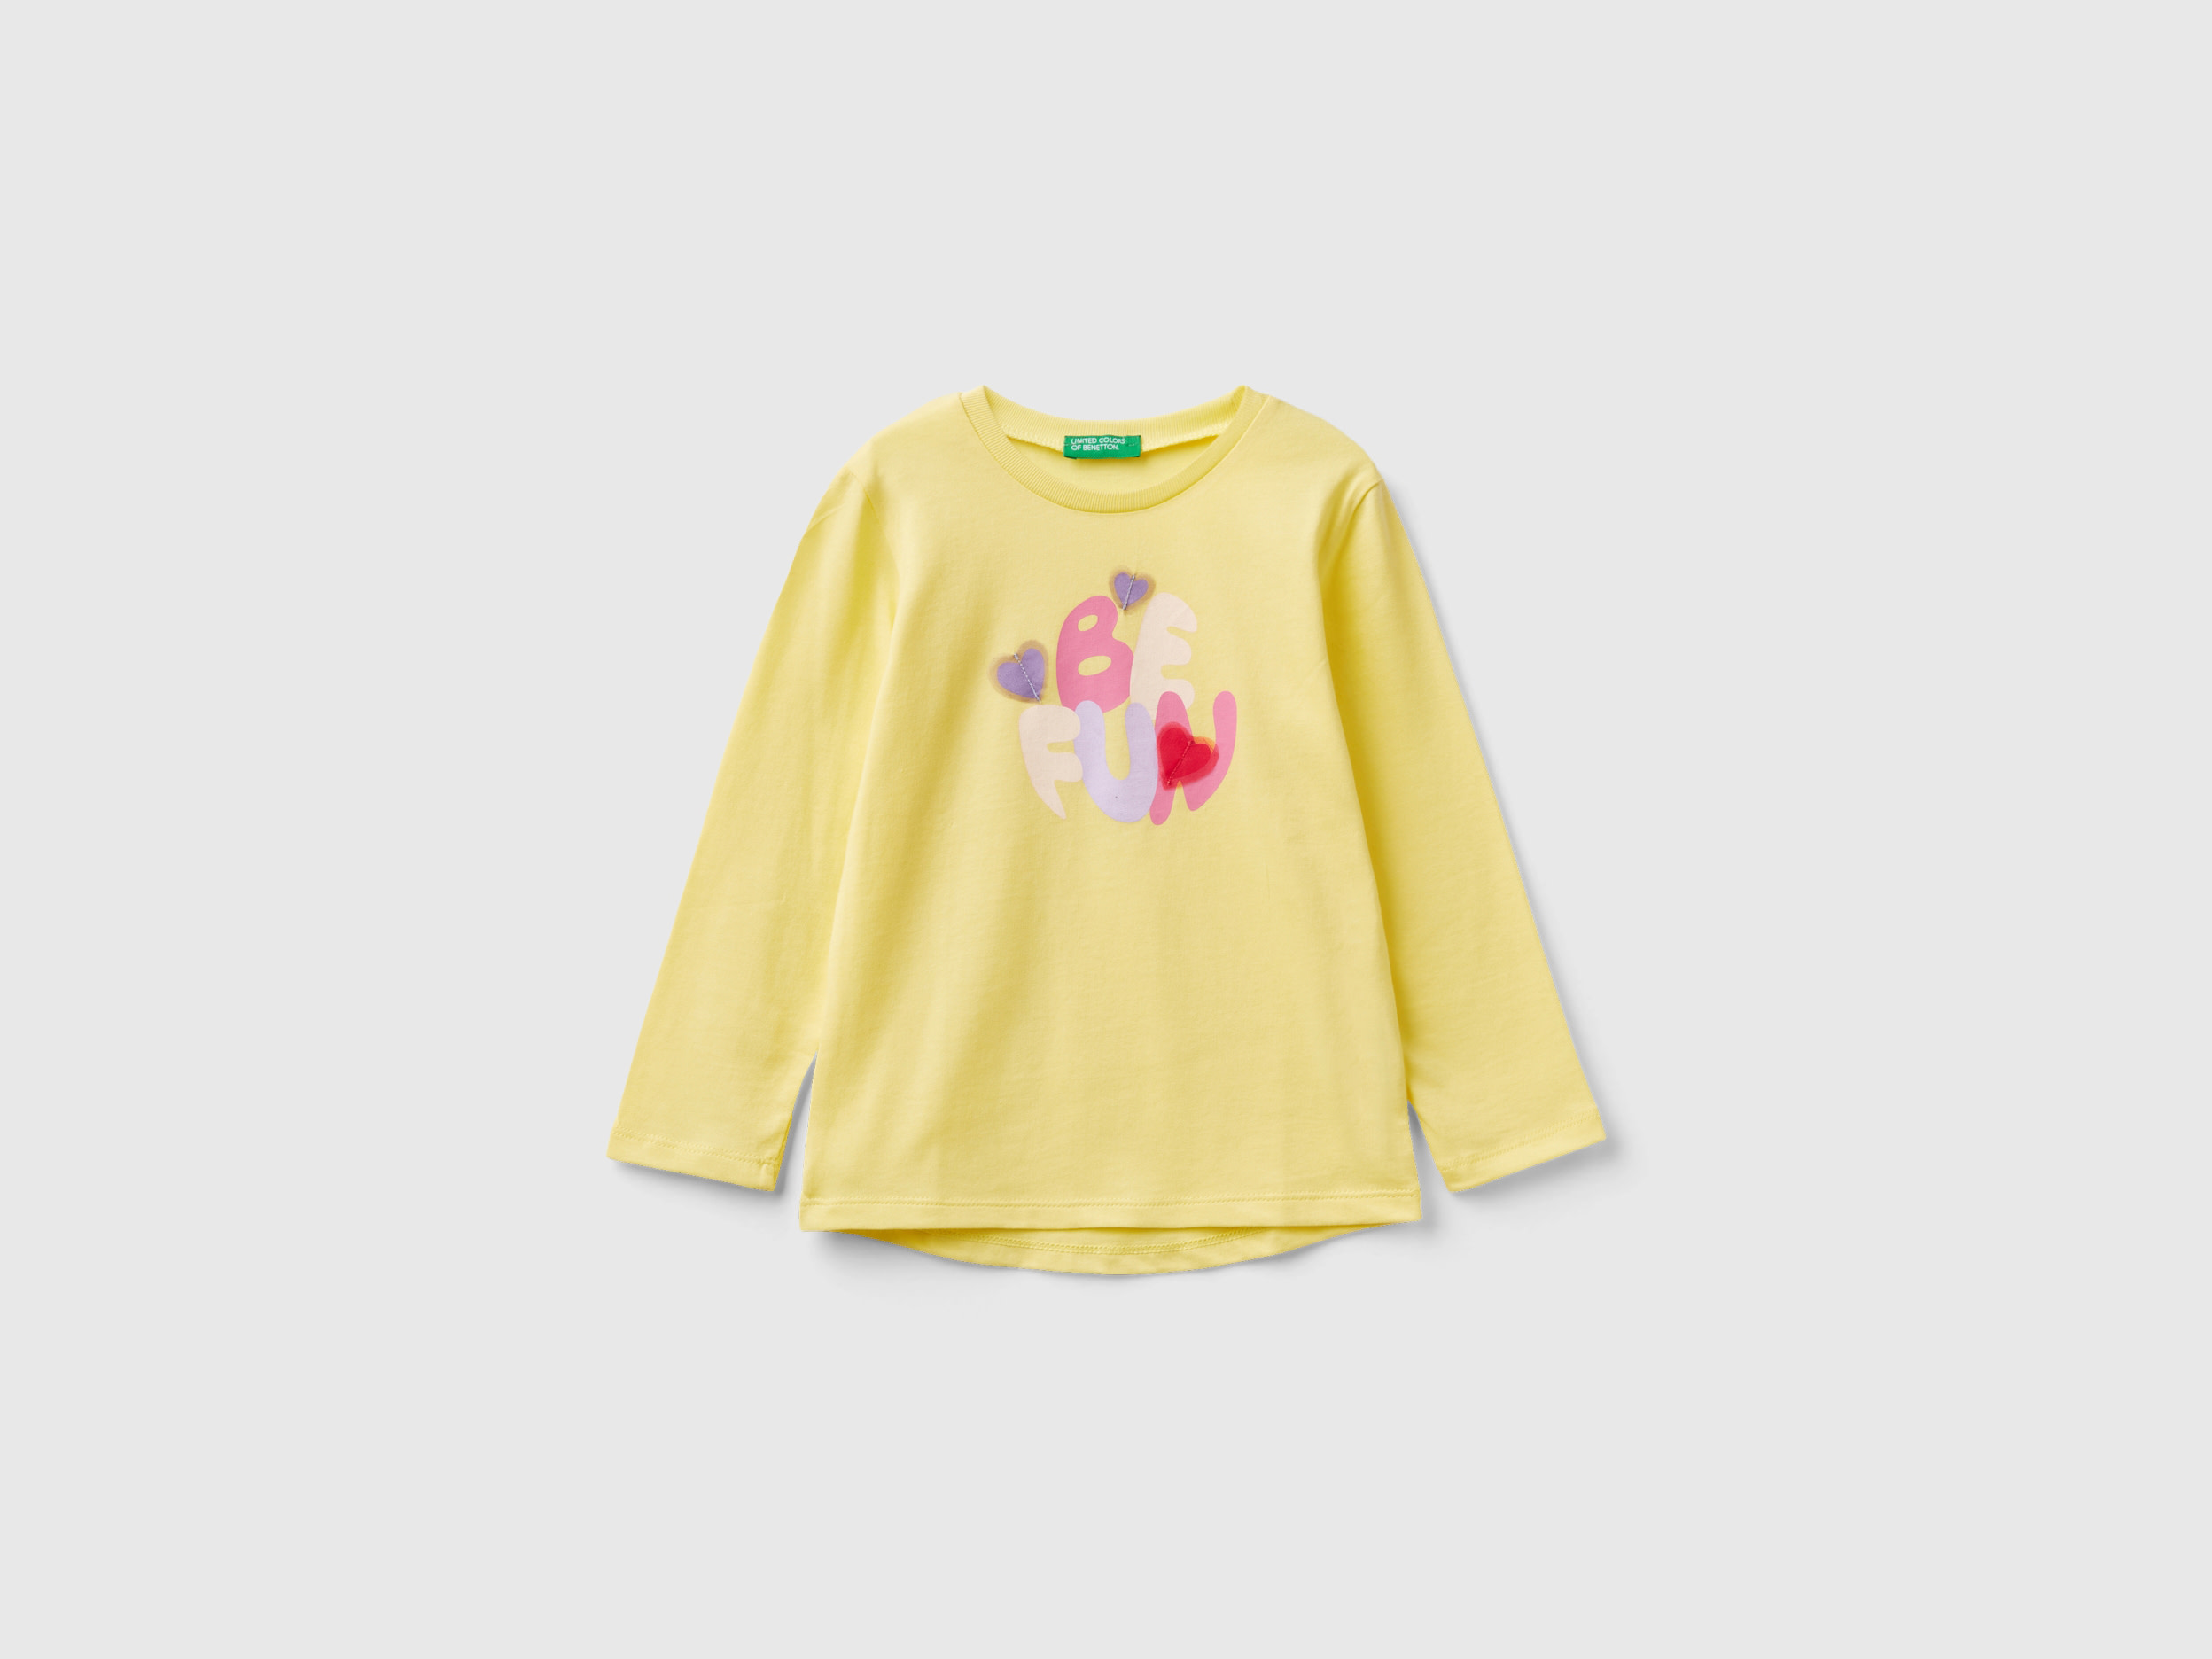 Benetton, Long Sleeve T-shirt With Print, size 12-18, Yellow, Kids